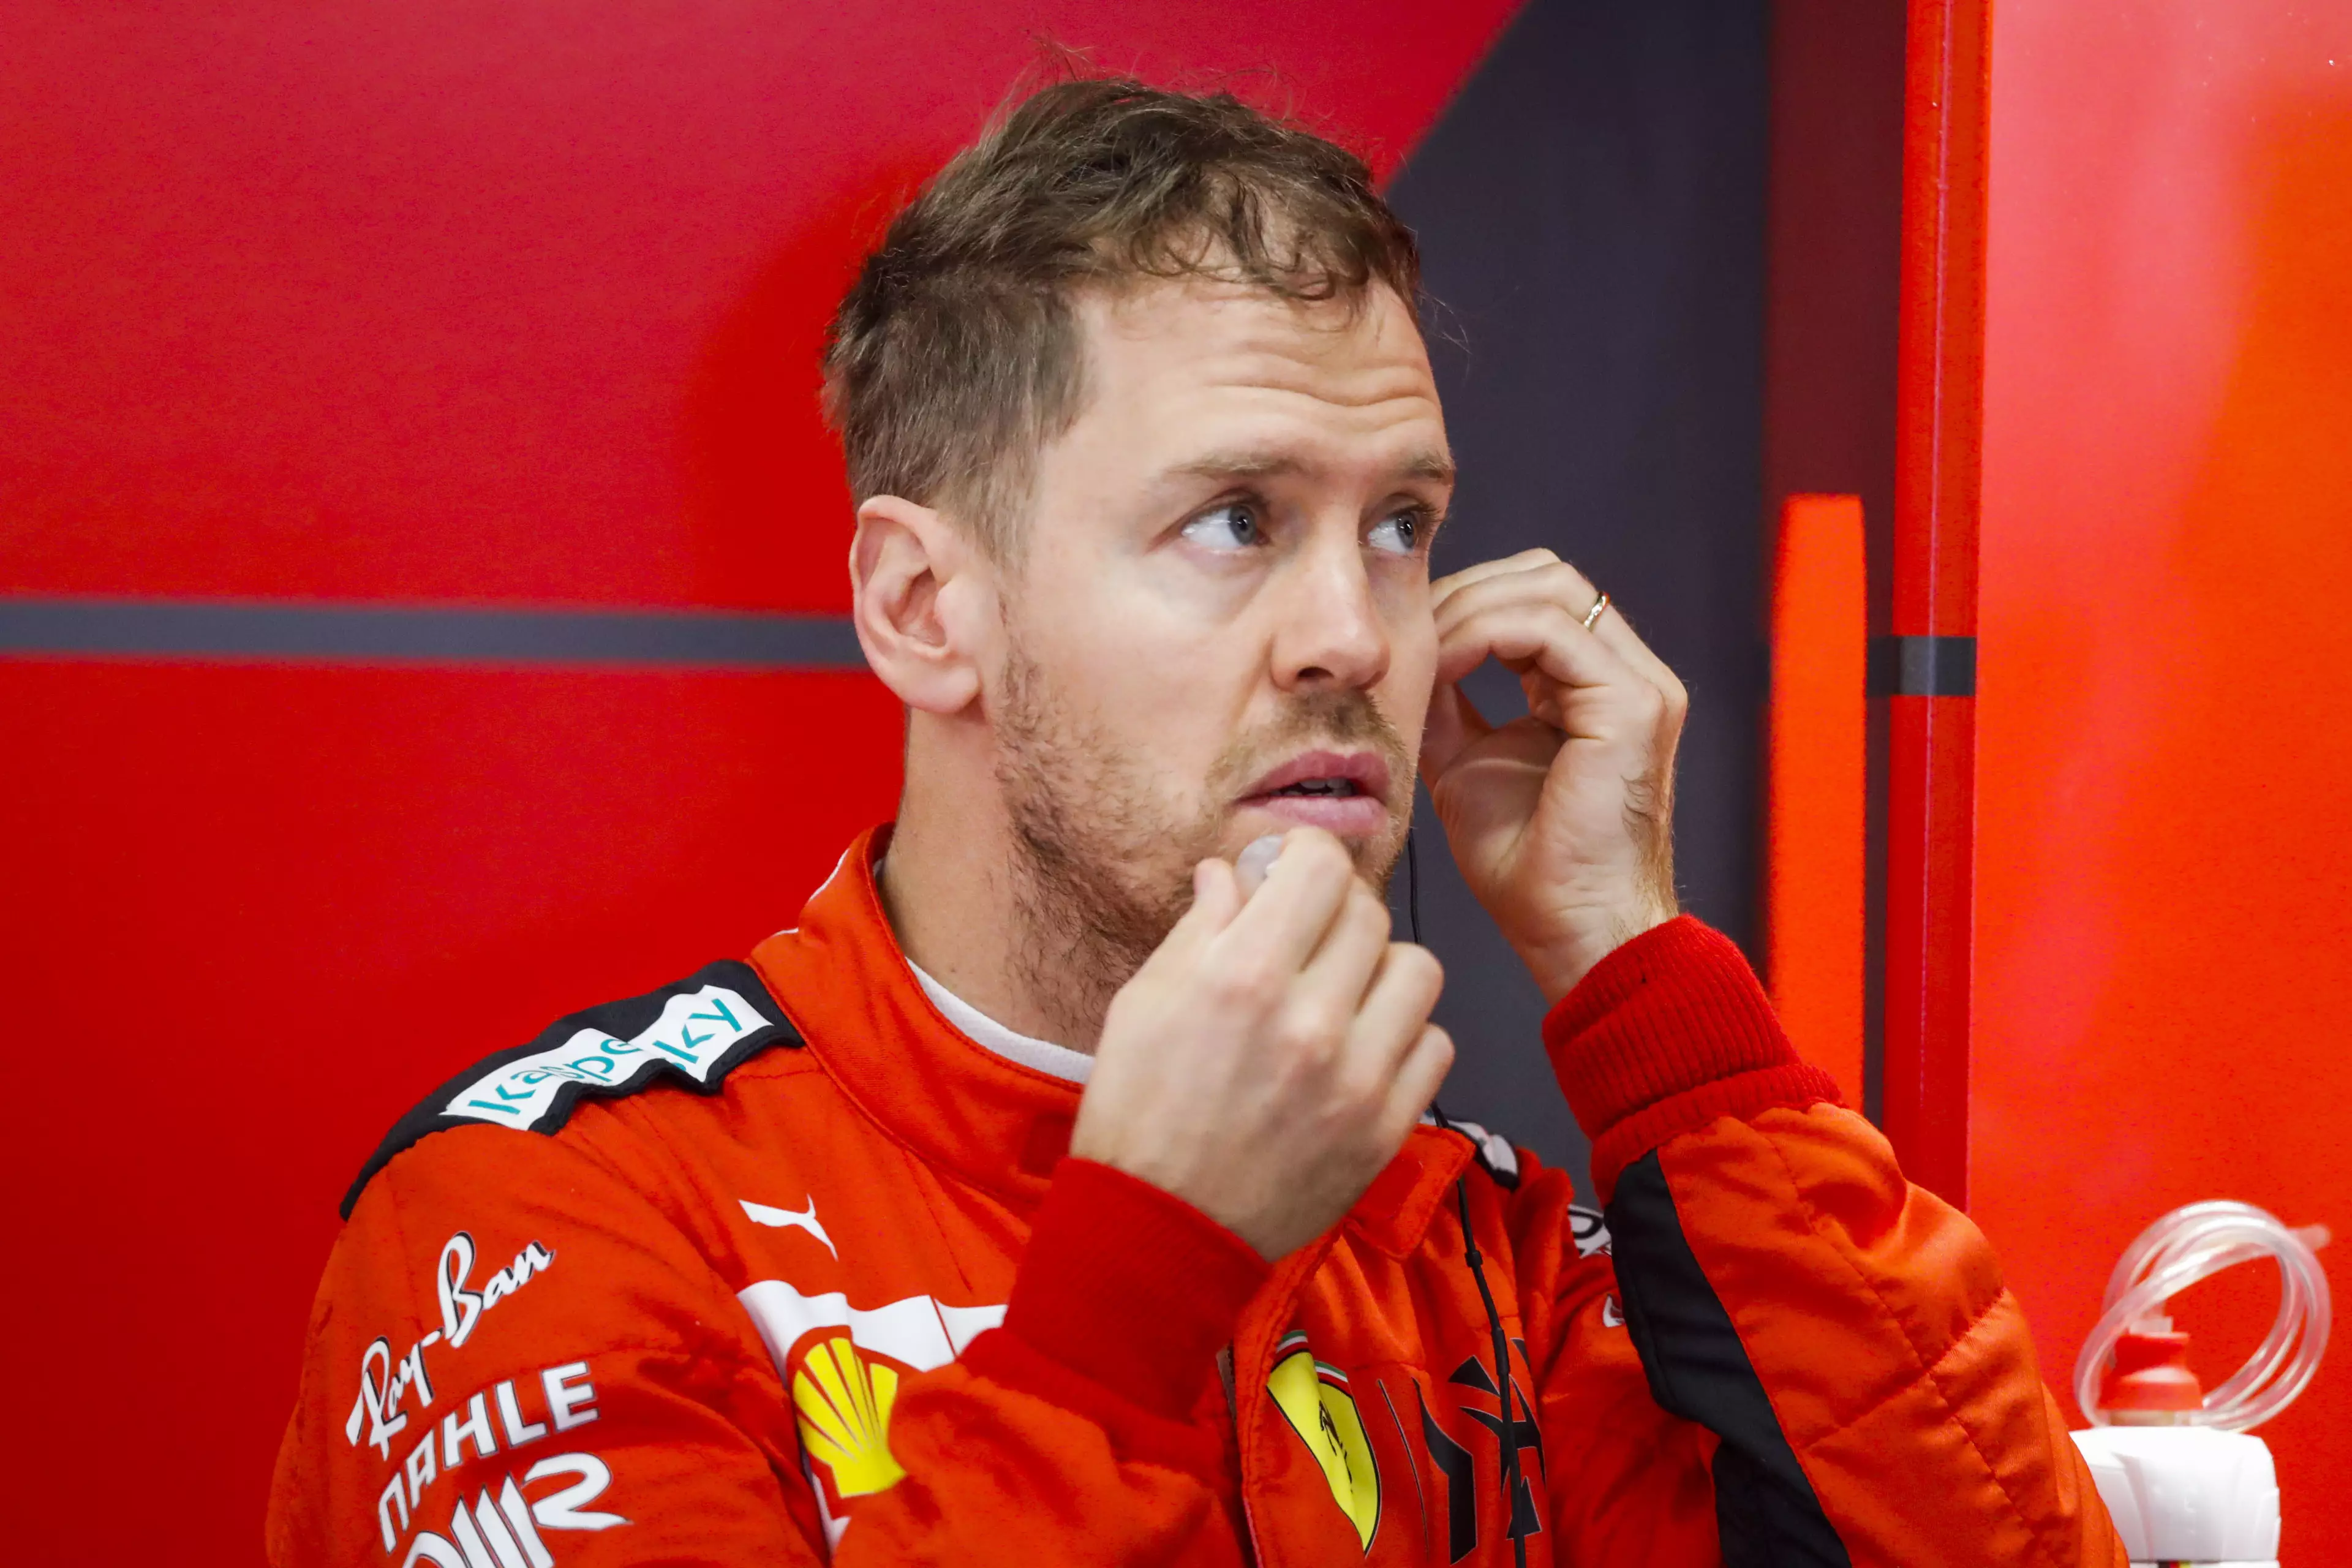 Vettel had a poor 2019 on the racetrack. Image: PA Images